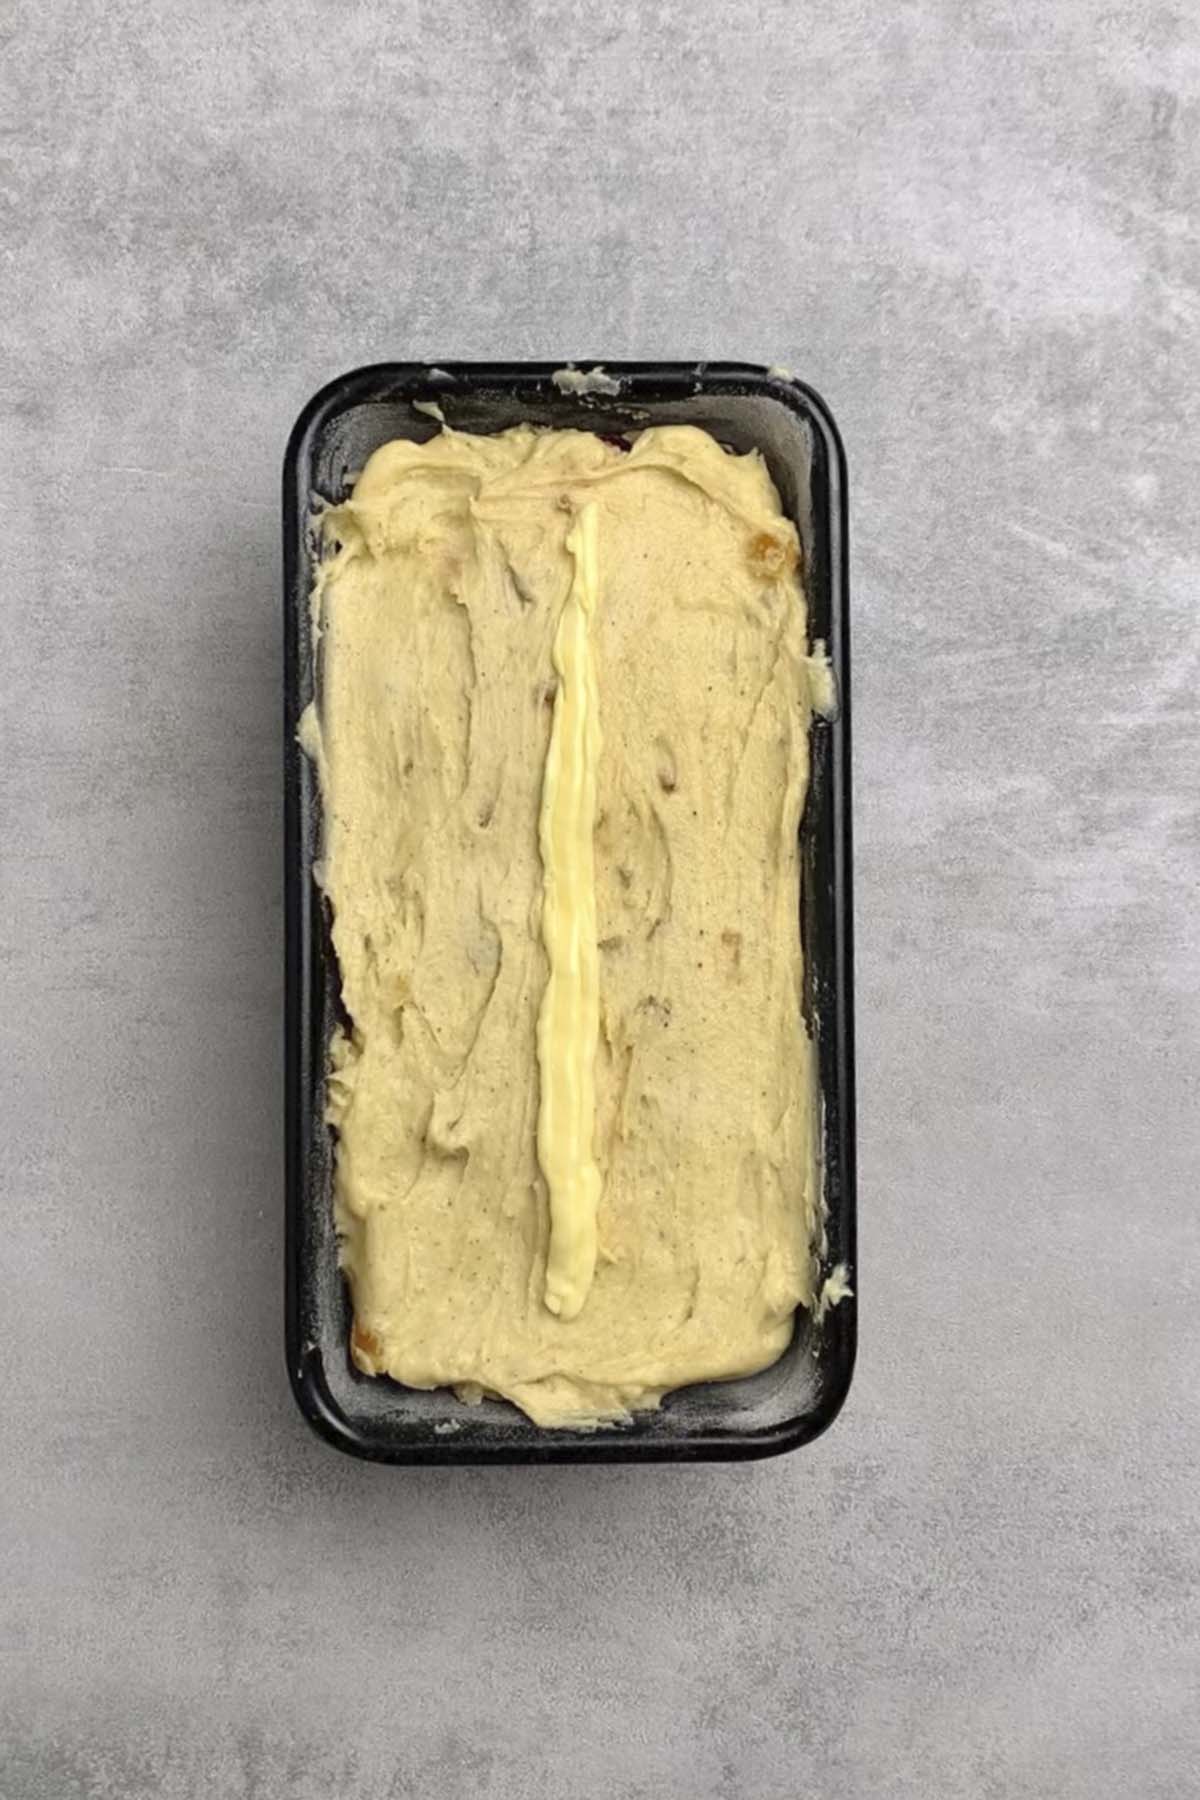 Bread mix in a loaf pan with a thin line of butter on top